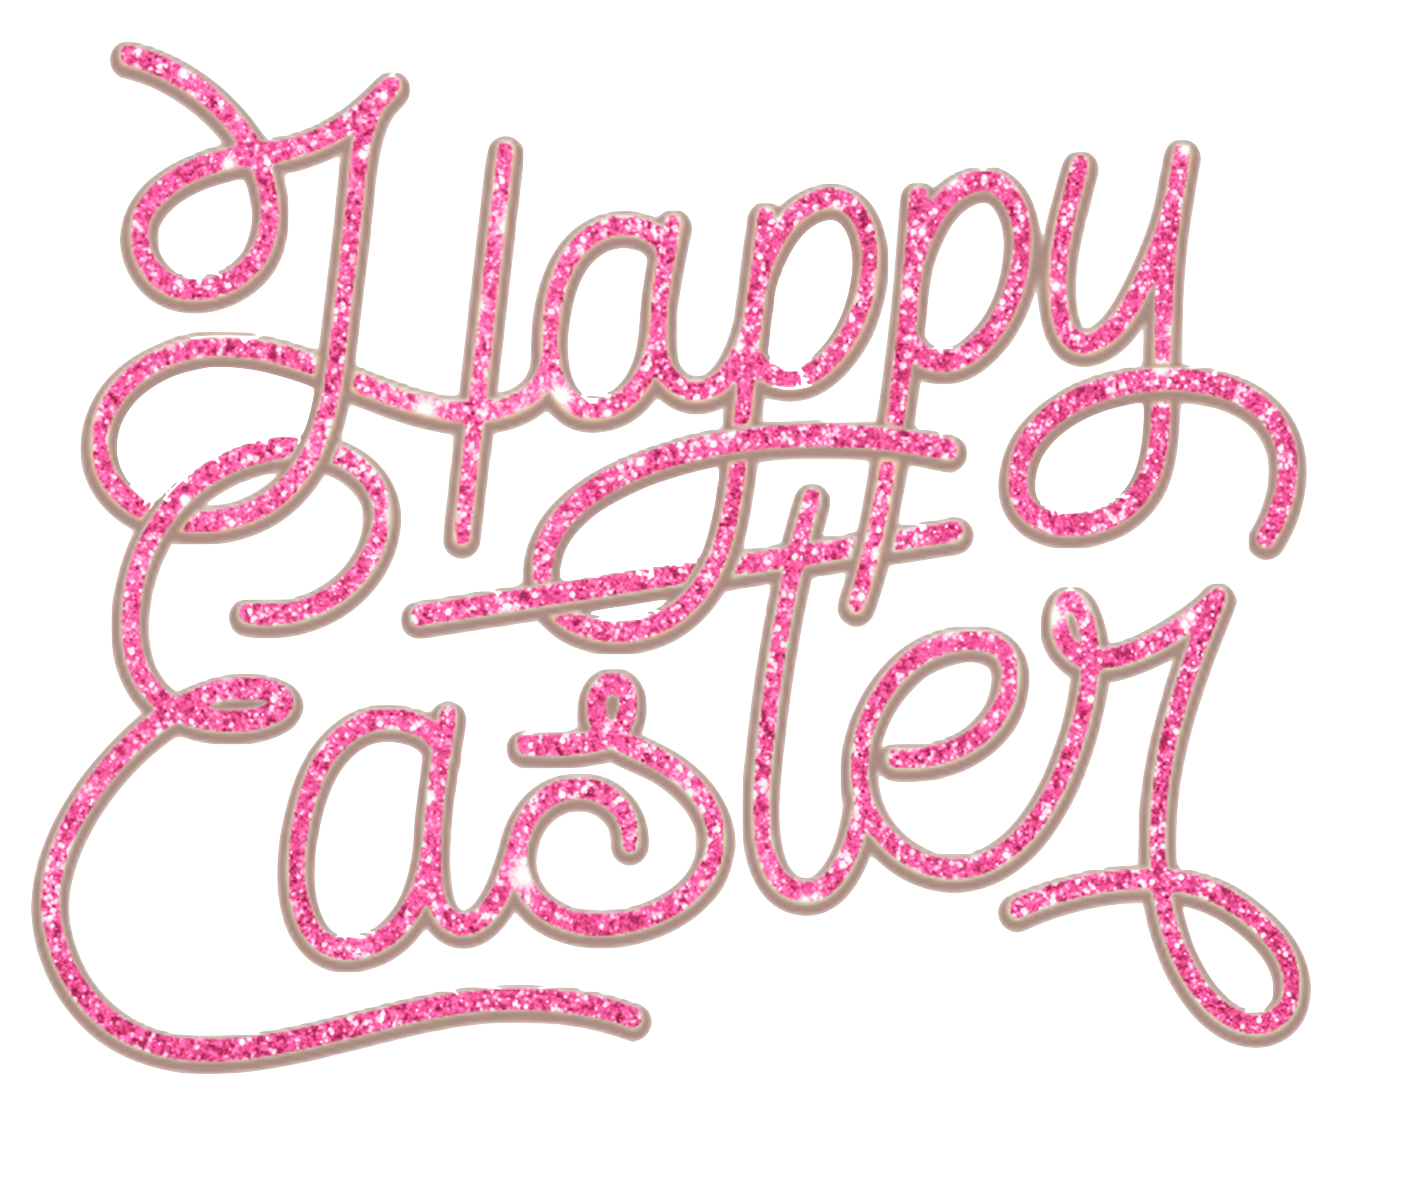 6 Happy Easter Words for signs & Easter Decorations - Glittery!